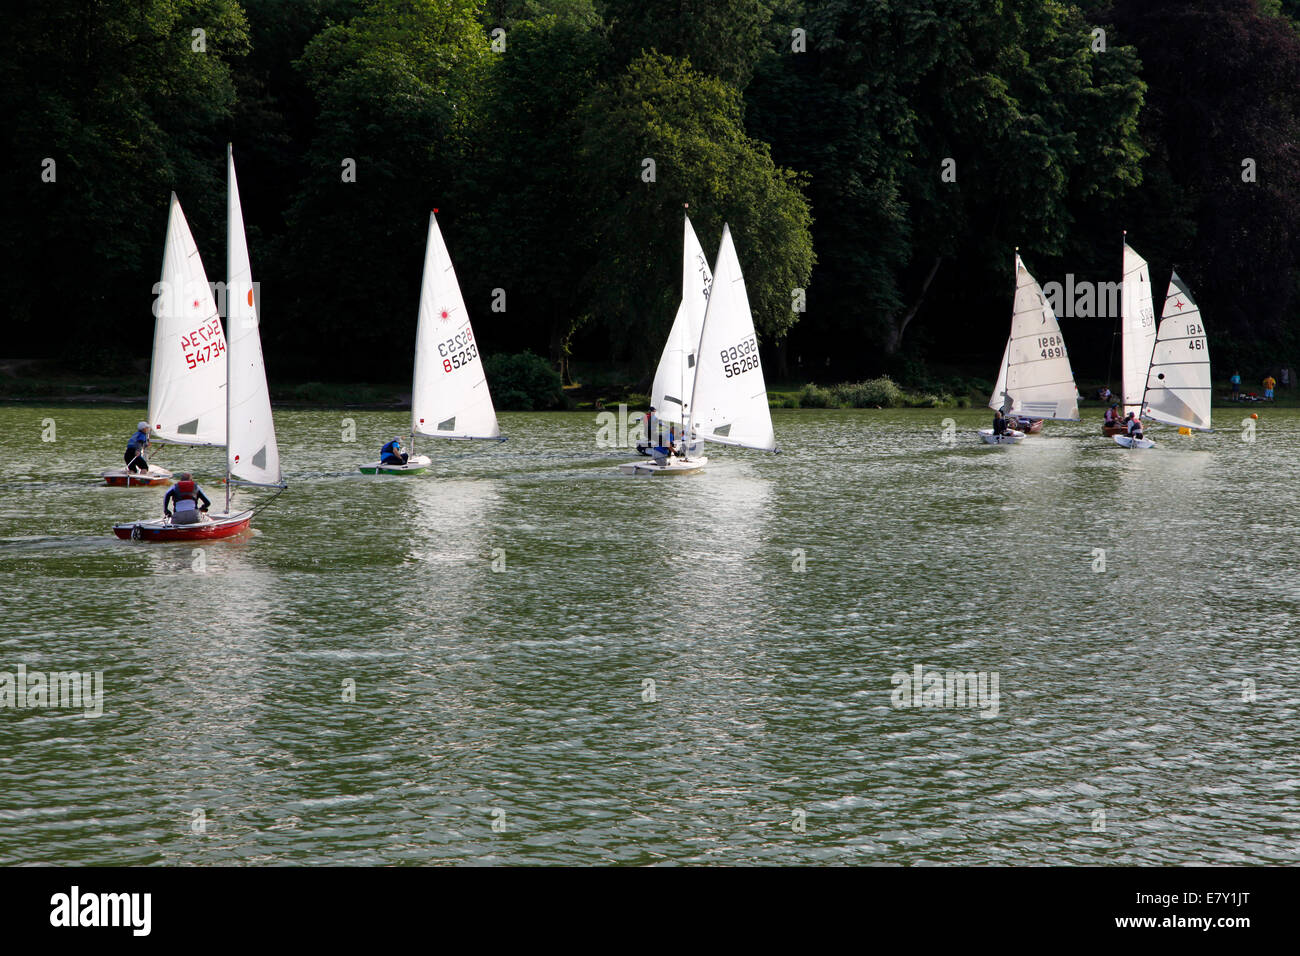 Sailing on the lake at Shearwater near Warminster in Wiltshire. Stock Photo